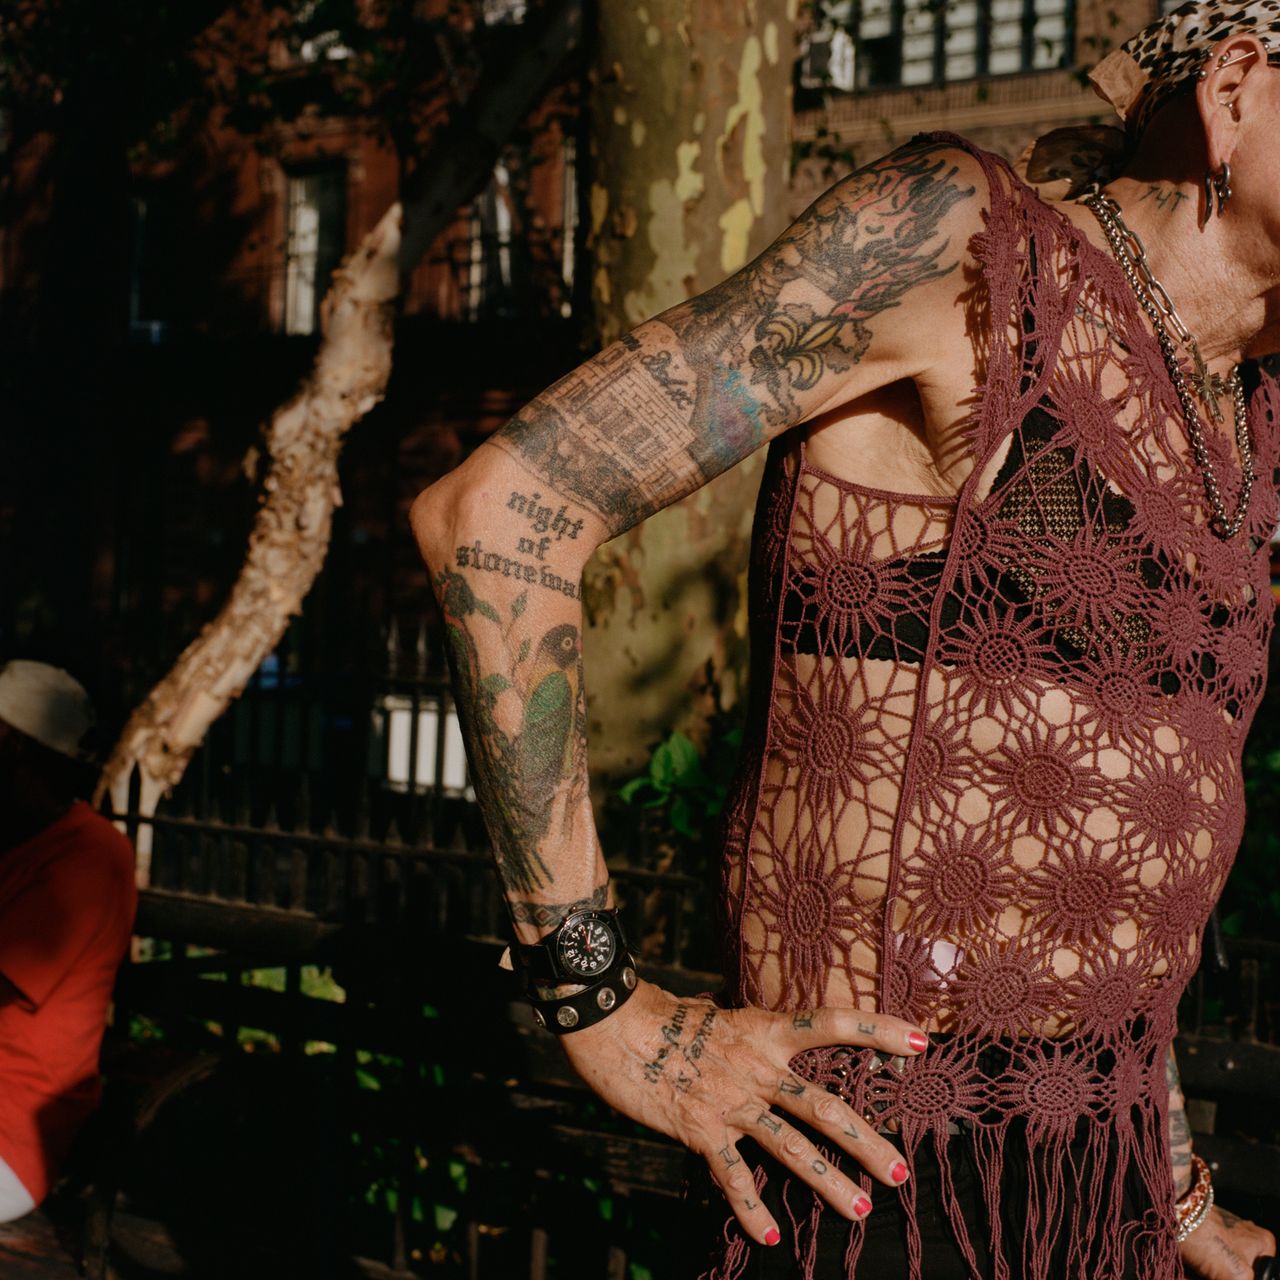 Reneé's body is covered in tattoos, including an image on her right arm of the Stonewall Inn, as it was set up in the 1970s, with silhouettes of rioters in front of large flames.